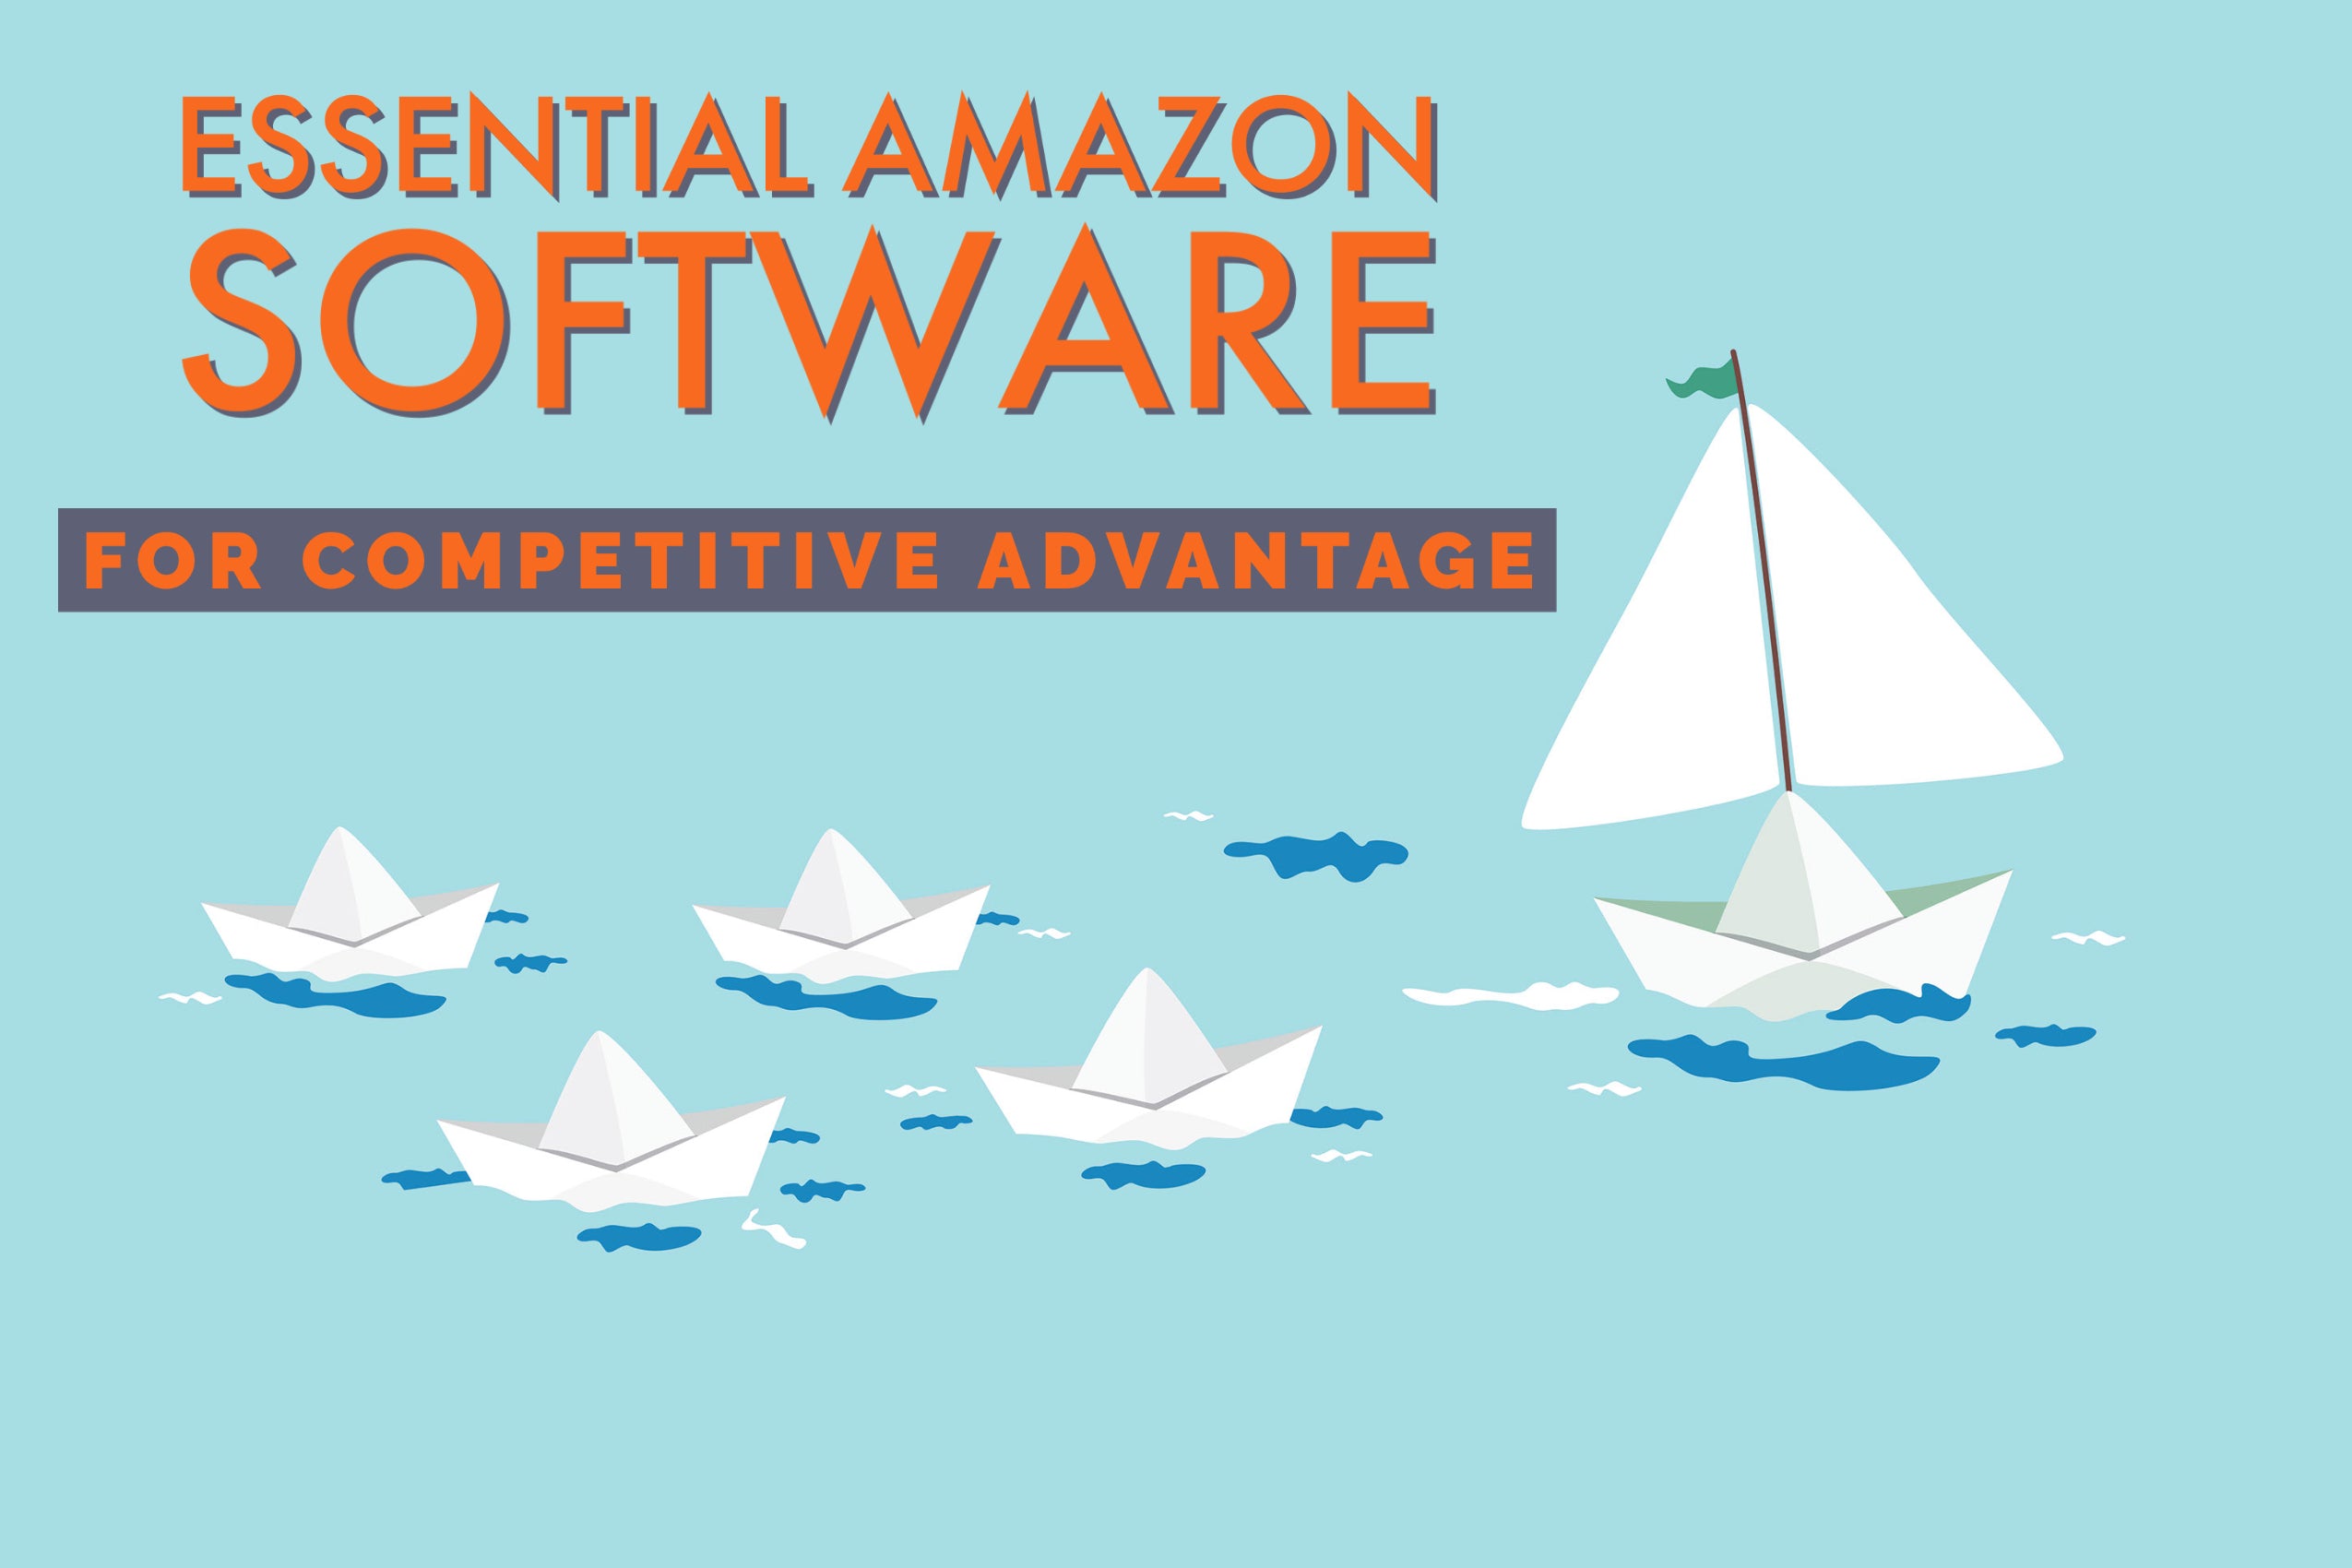 Essential Amazon Software for a Competitive Advantage